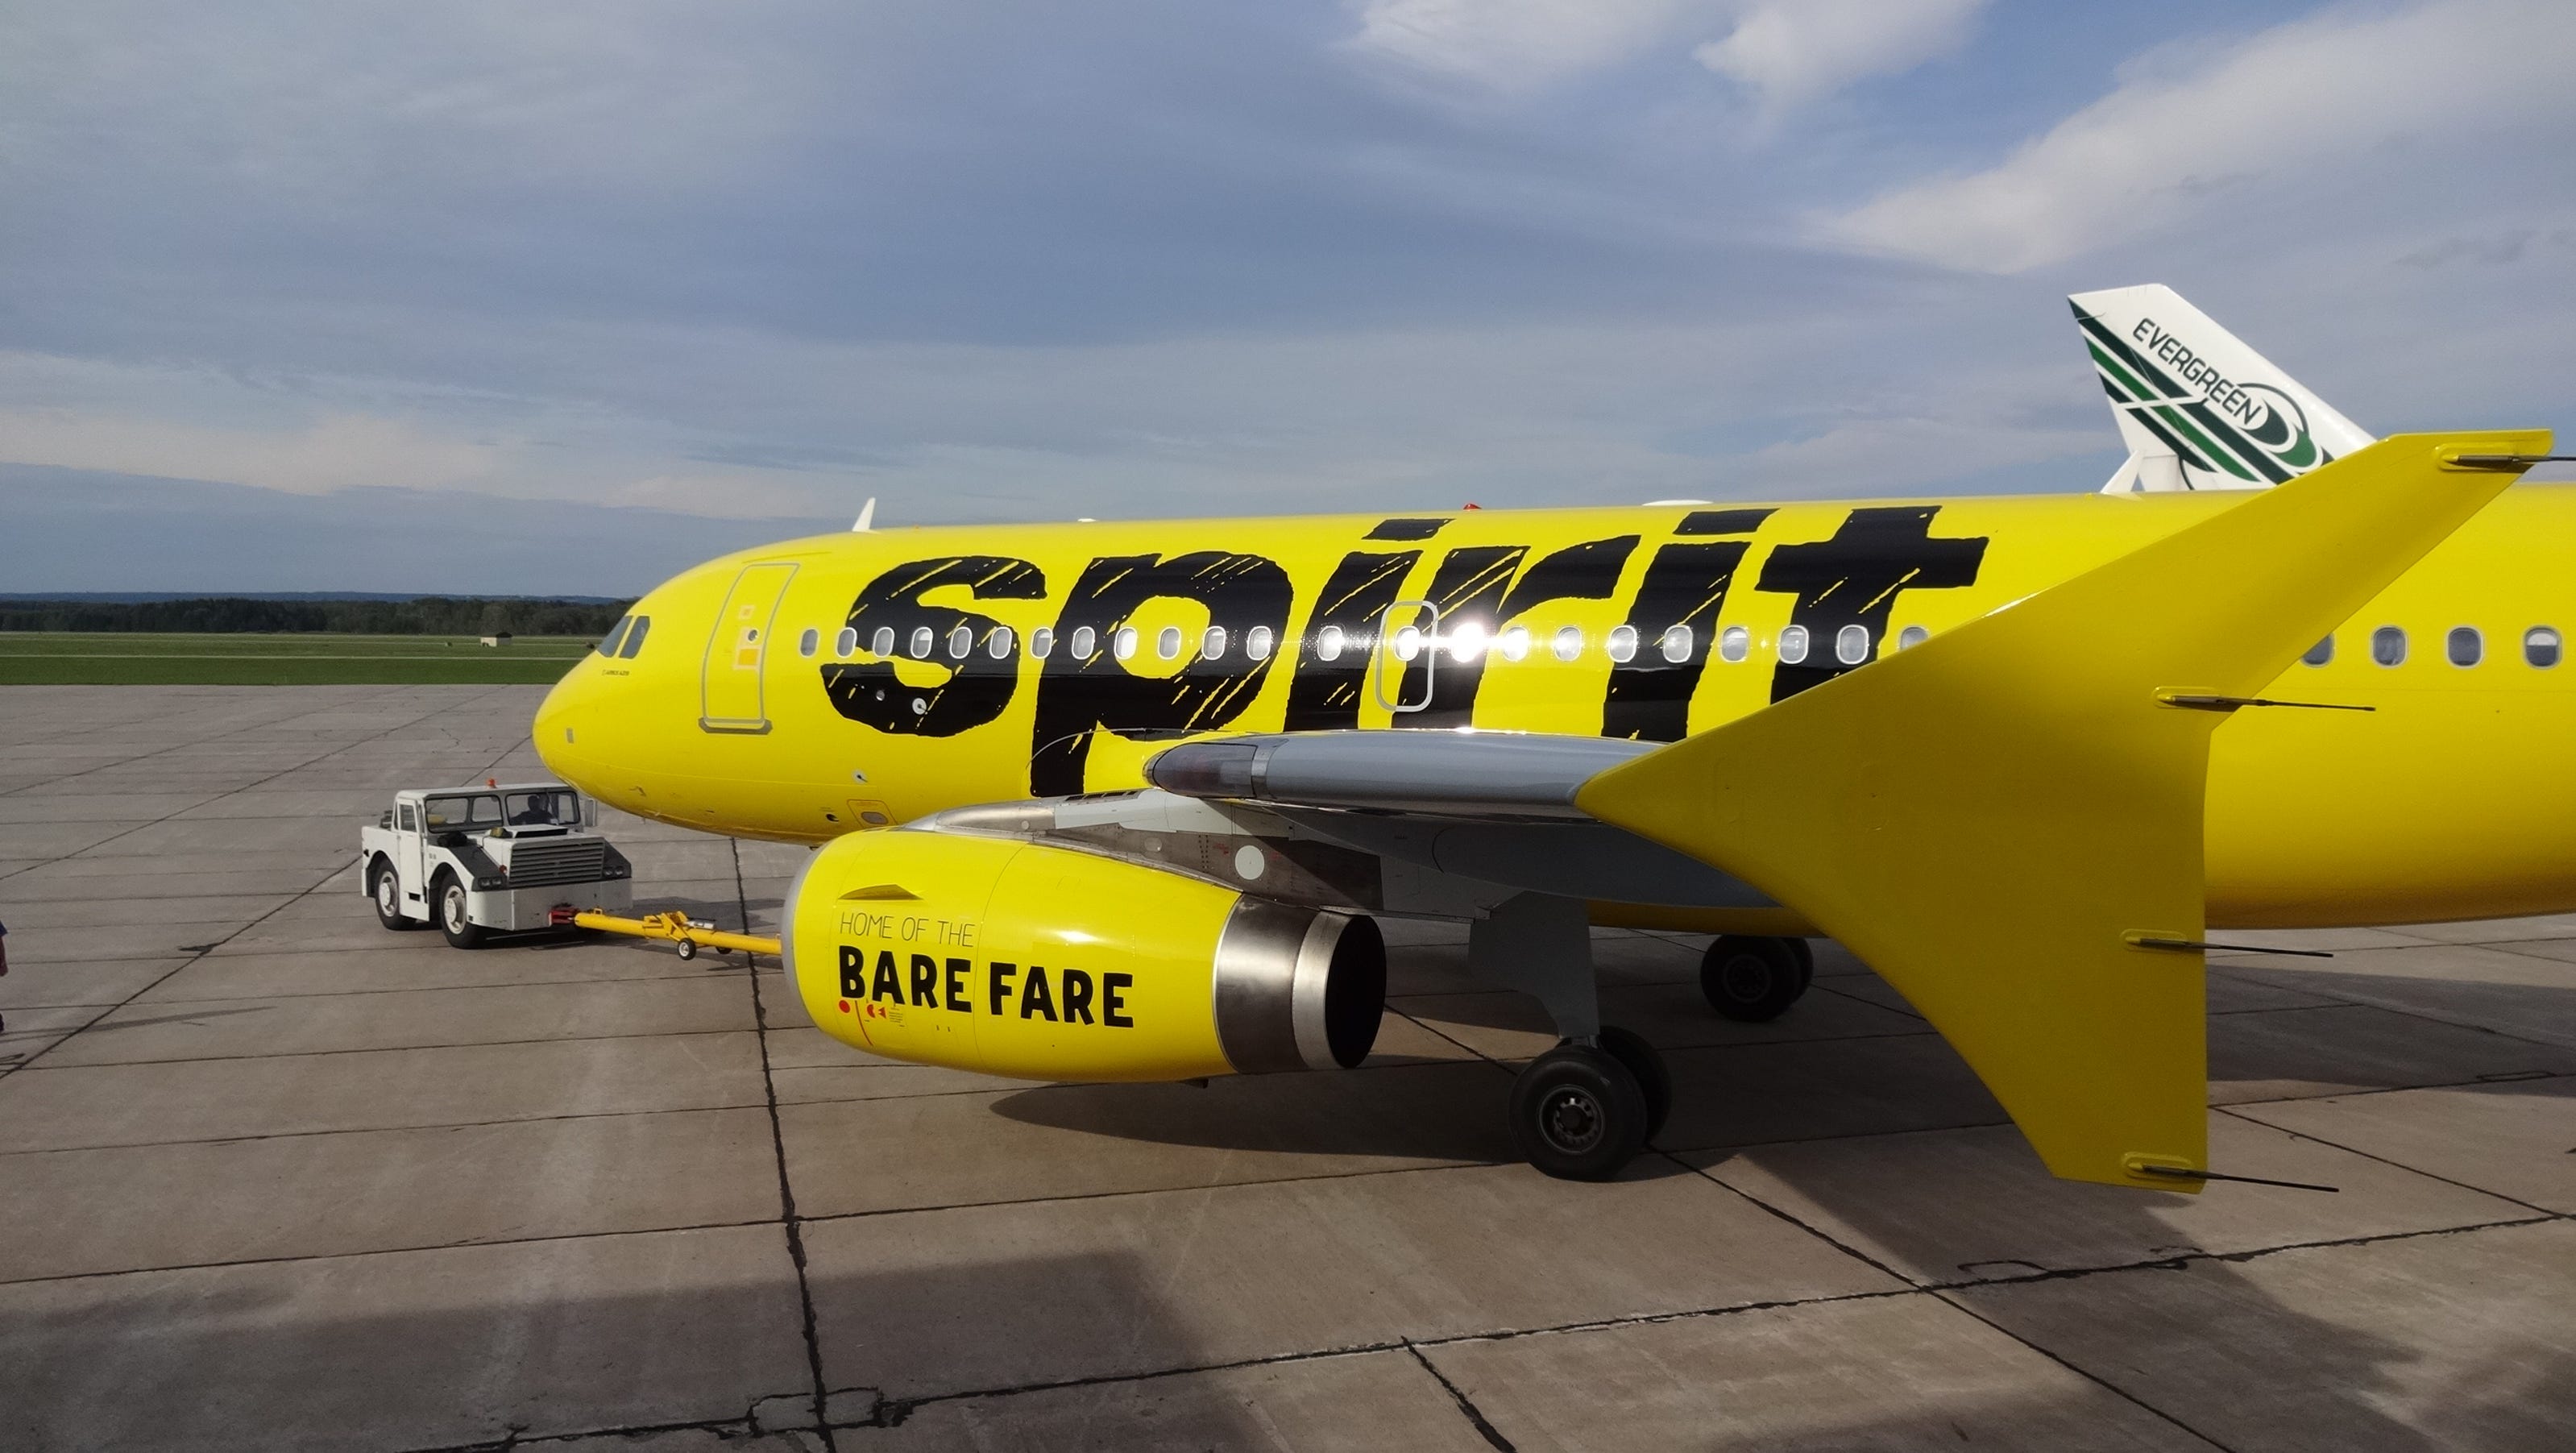 spirit-airlines-raises-checked-bag-fee-for-holiday-travel